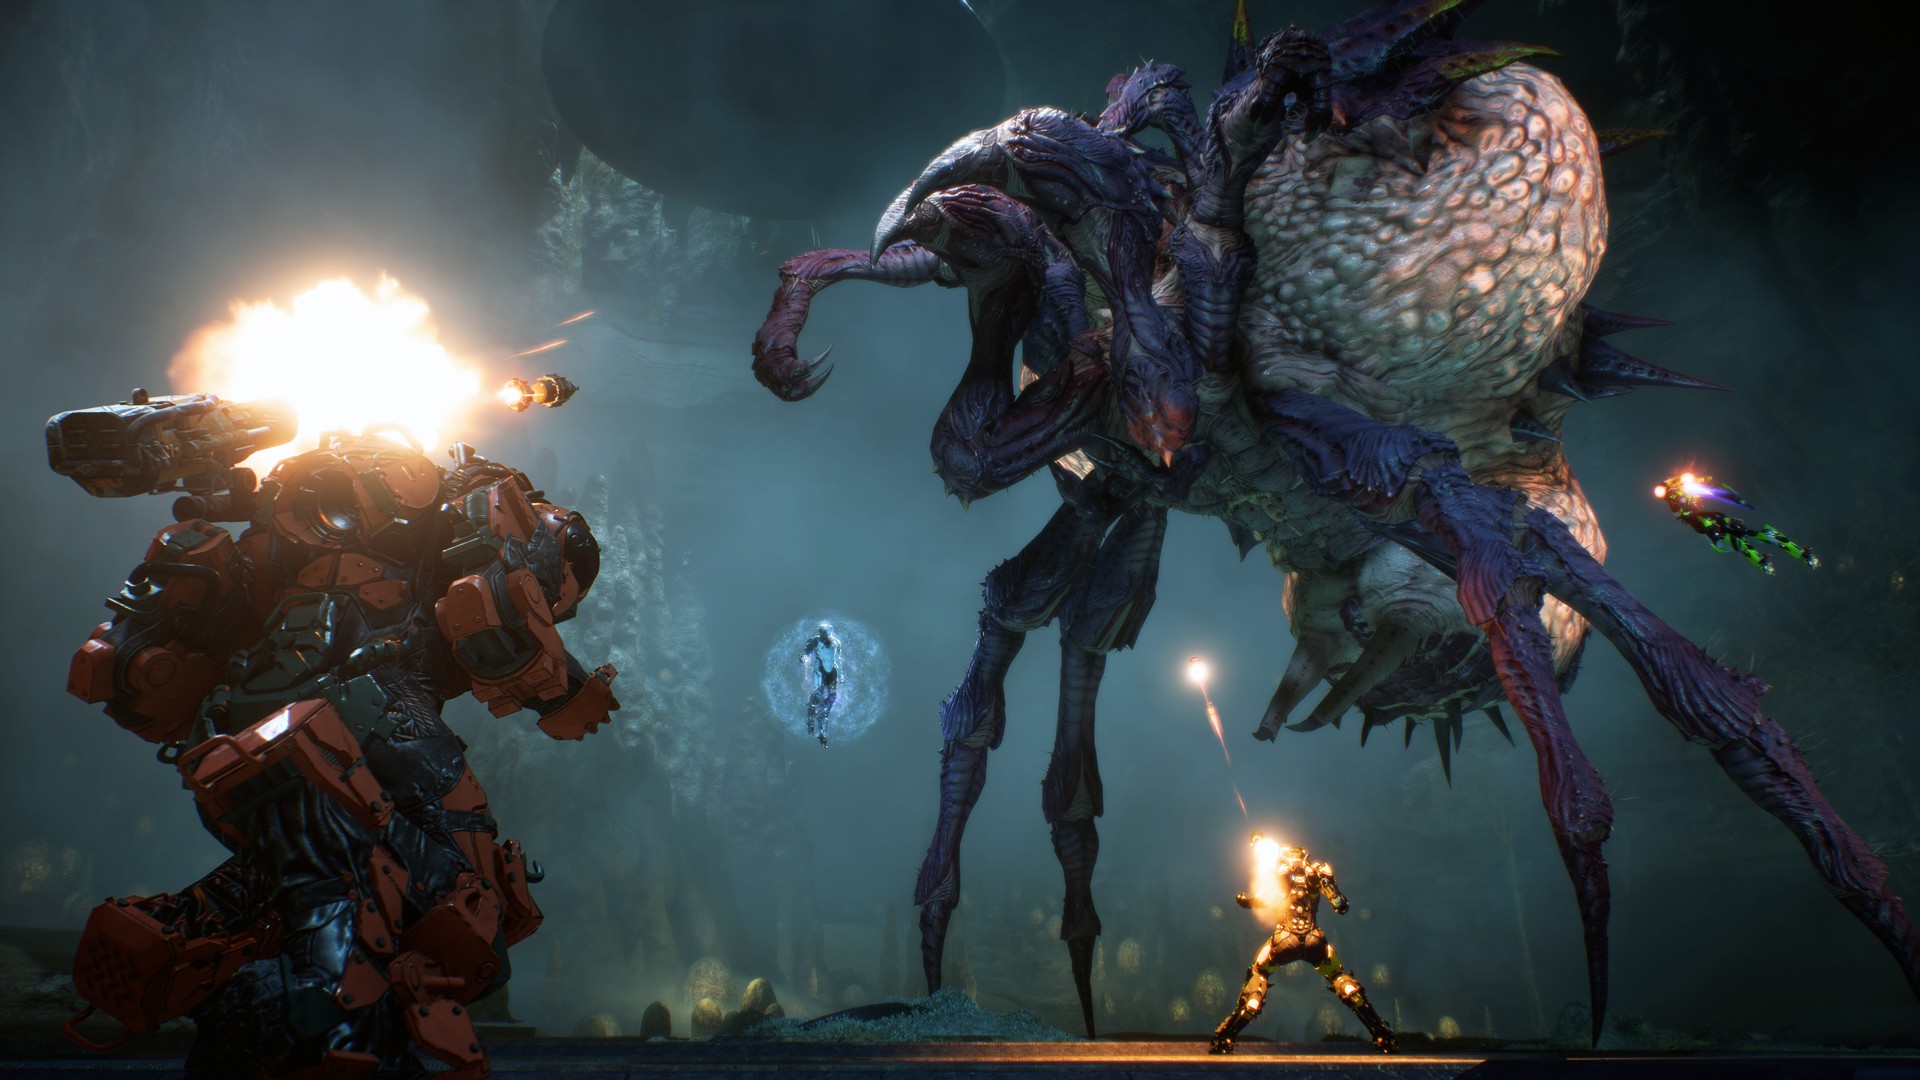 Anthem Open Demo on February 1-3 for Xbox One Screen-8-1080.jpg